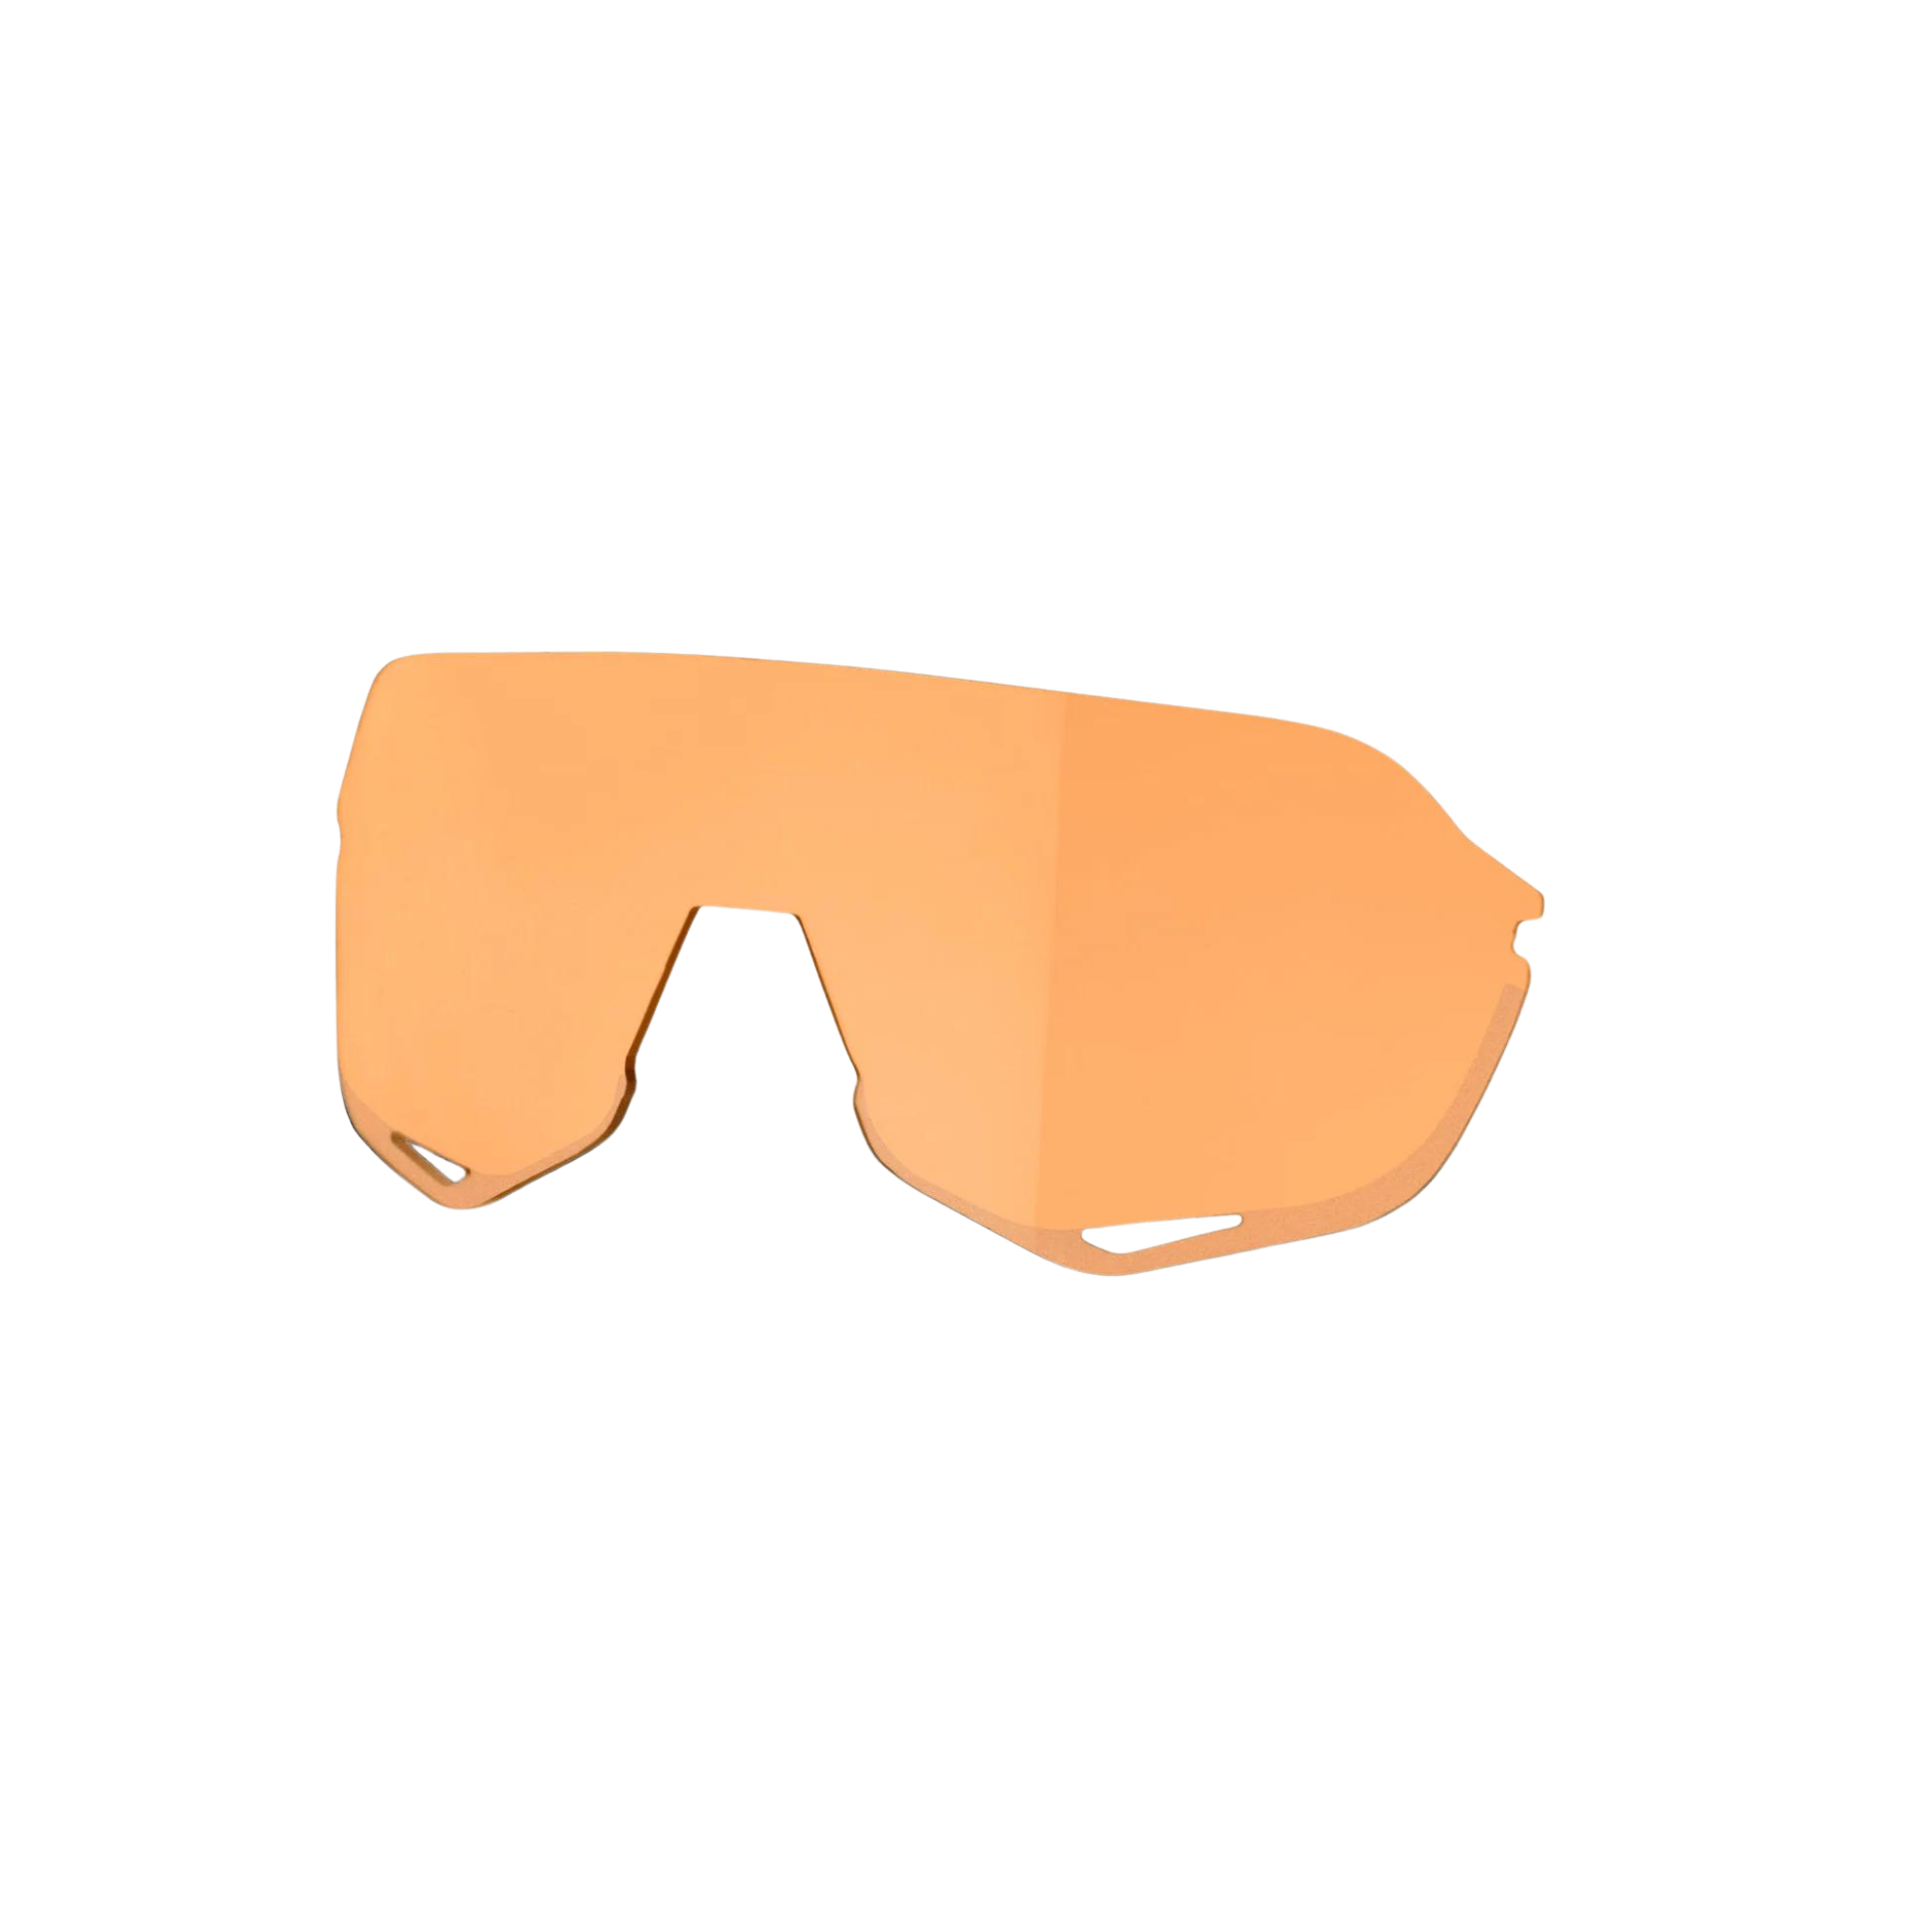 100% S2 Replacement Lens - Persimmon